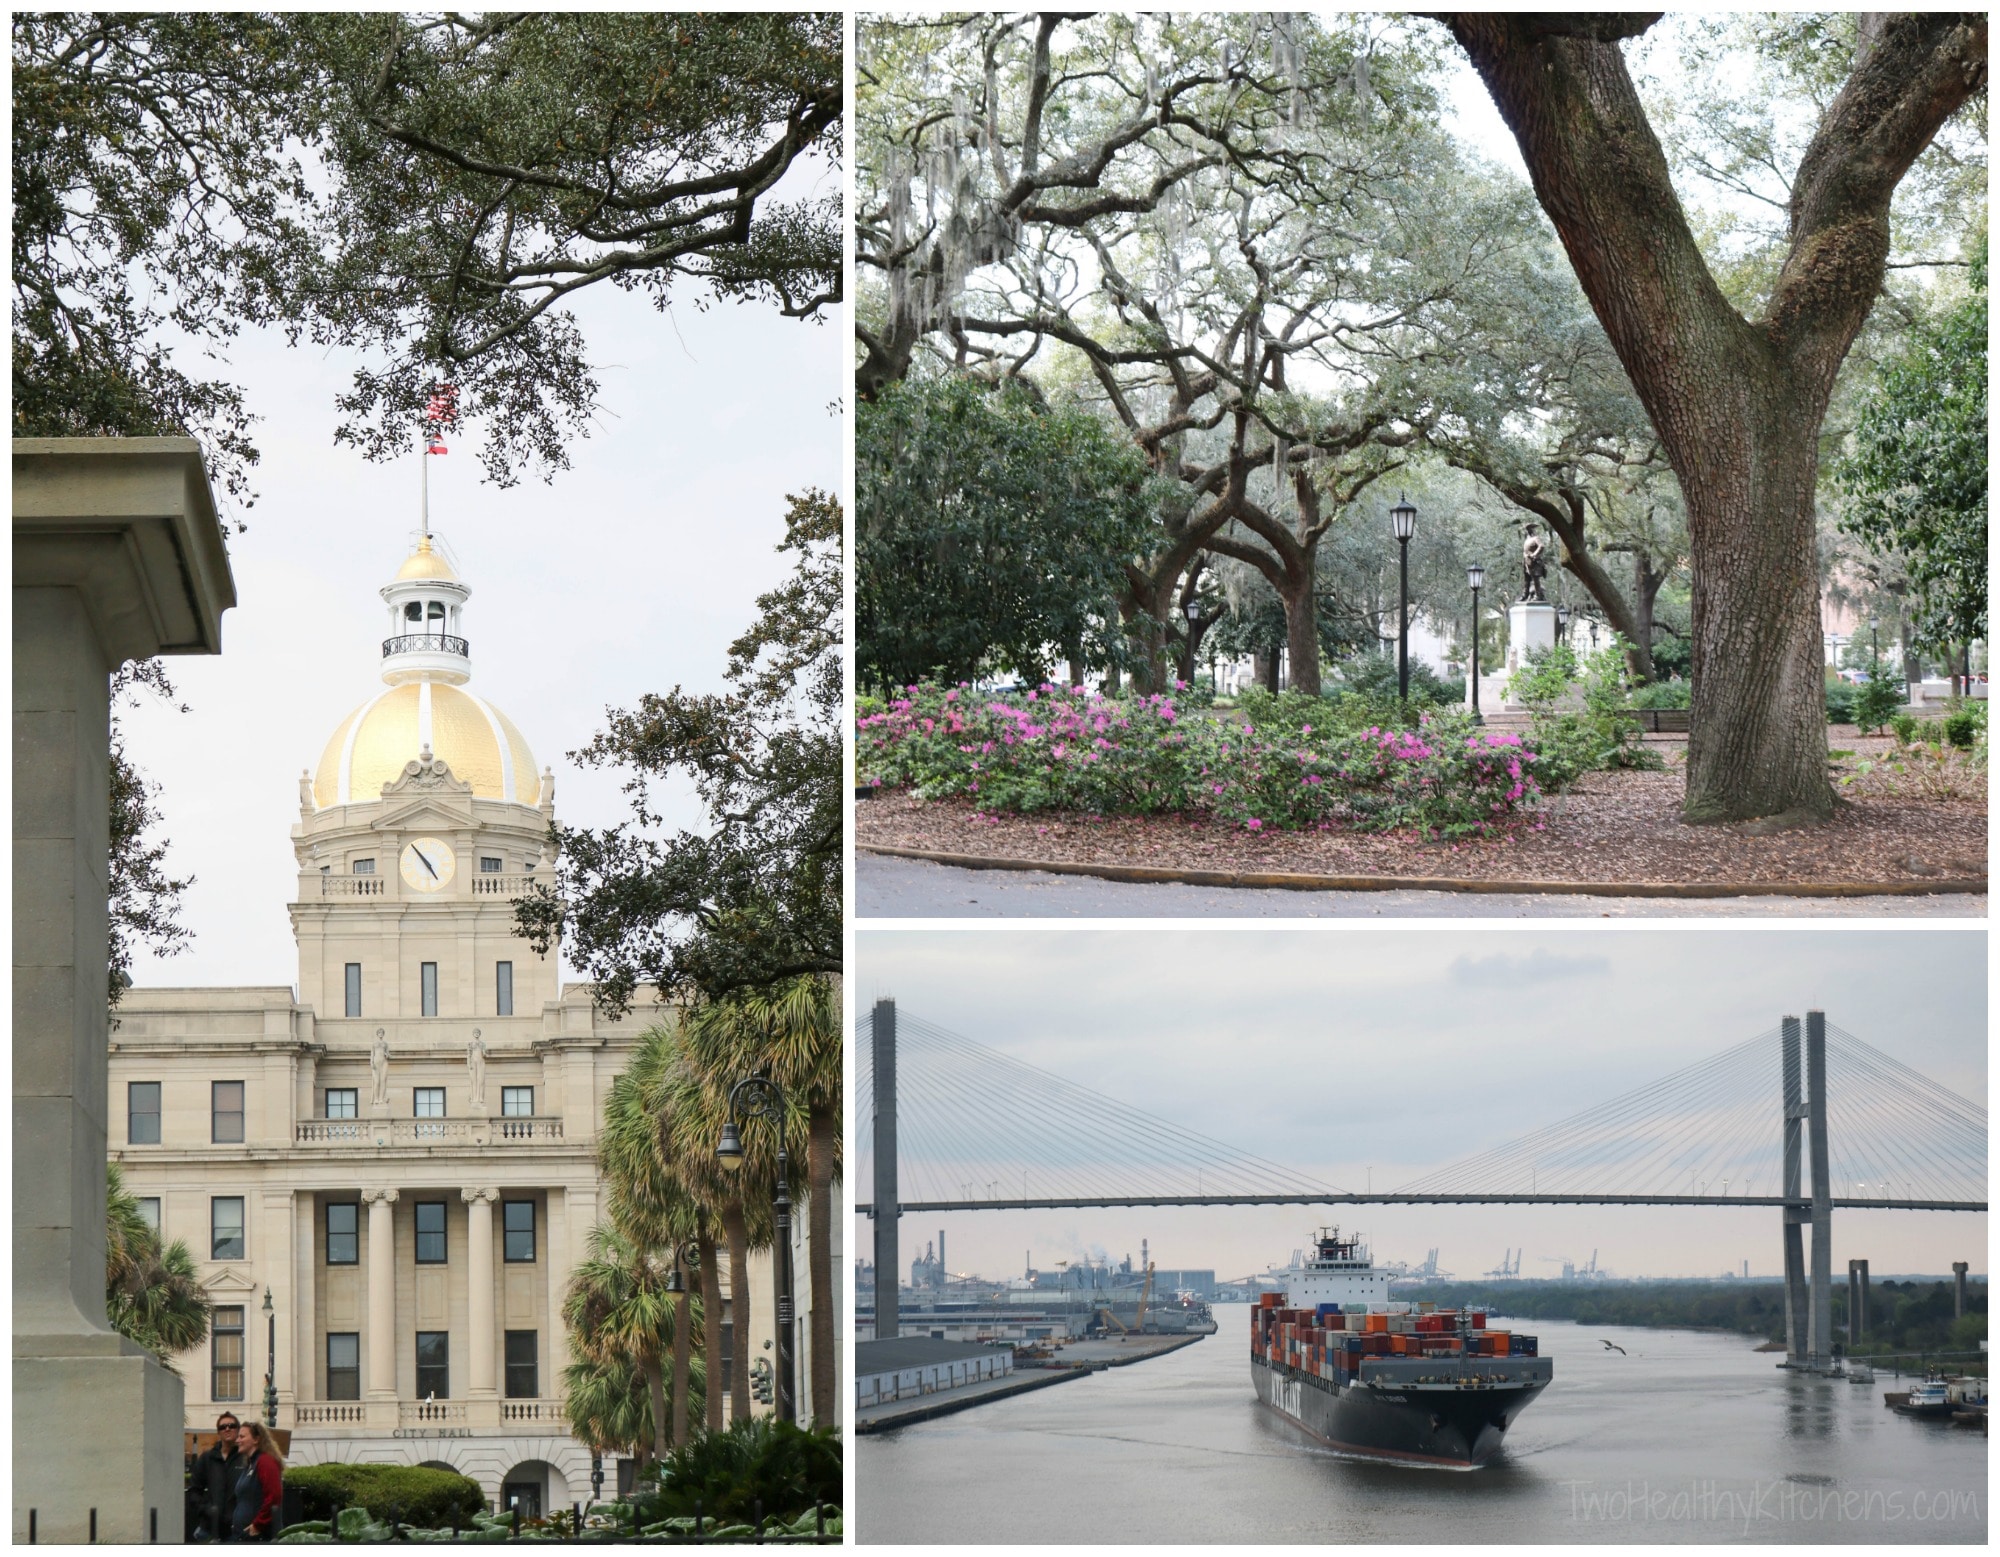 Collage of 3 scenic Savannah photos: gold-domed building, park and ship passing under bridge.